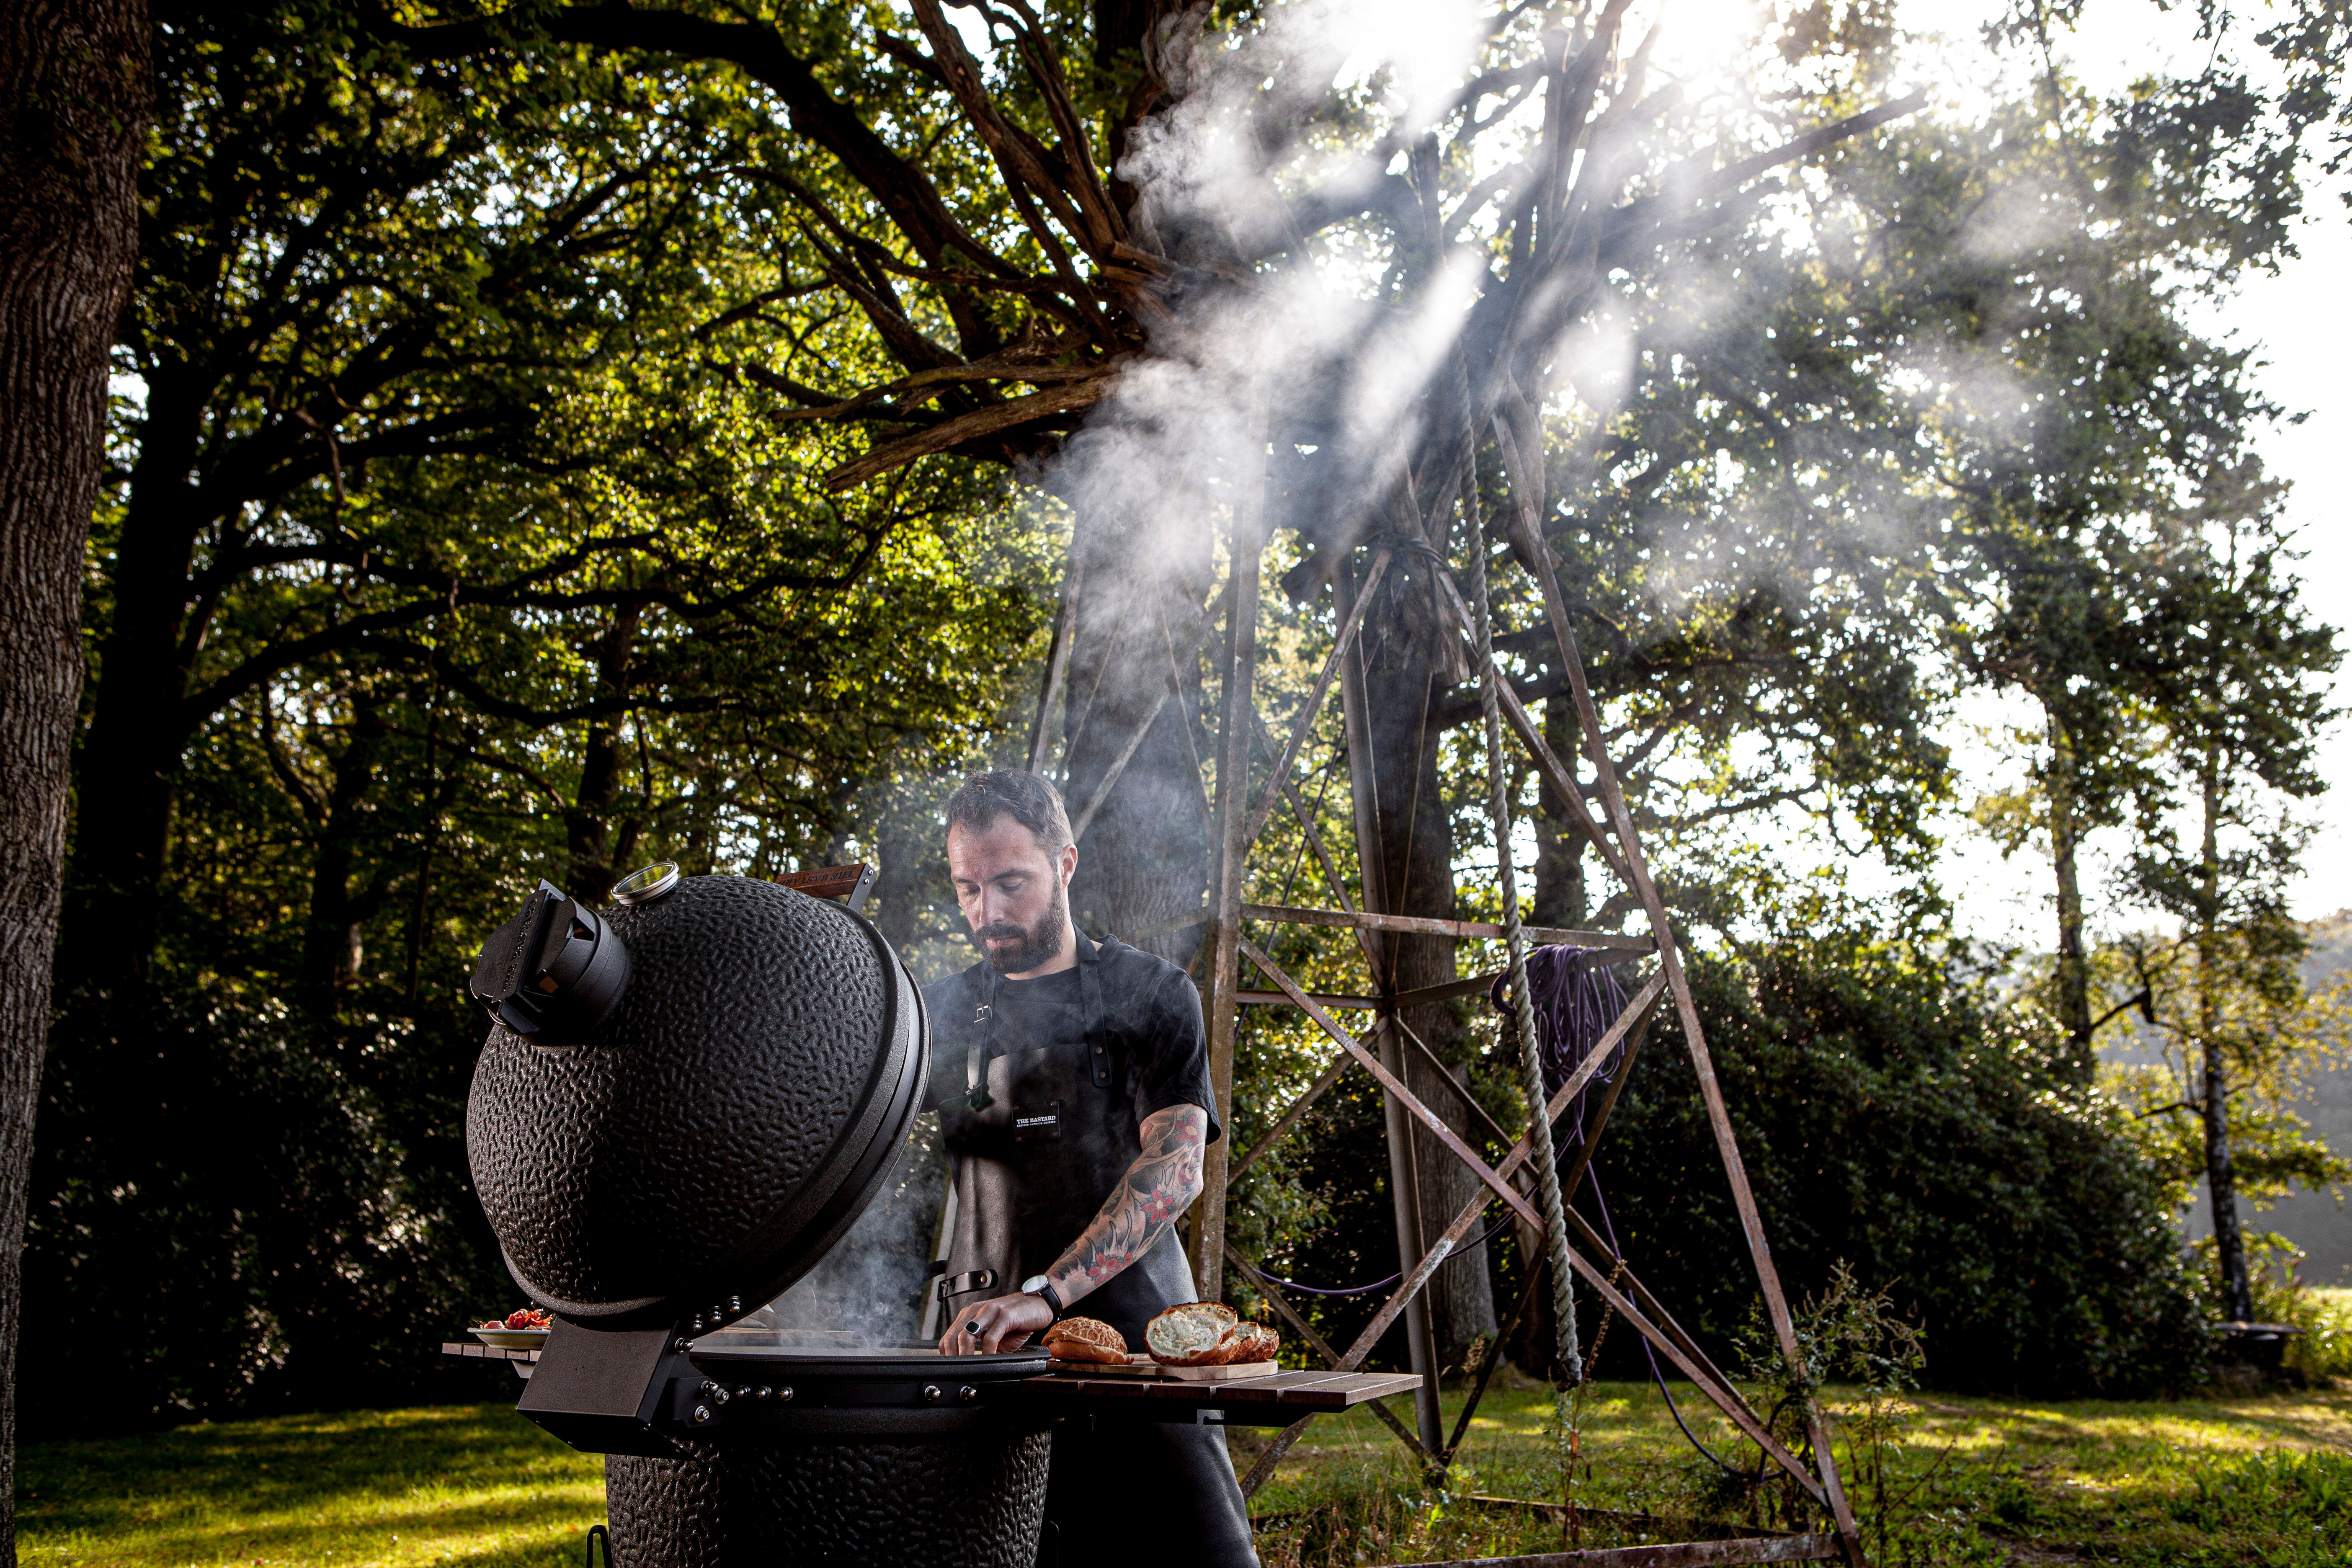 THE BASTARD: the trend of ceramic barbecuing blows over from the Netherlands!